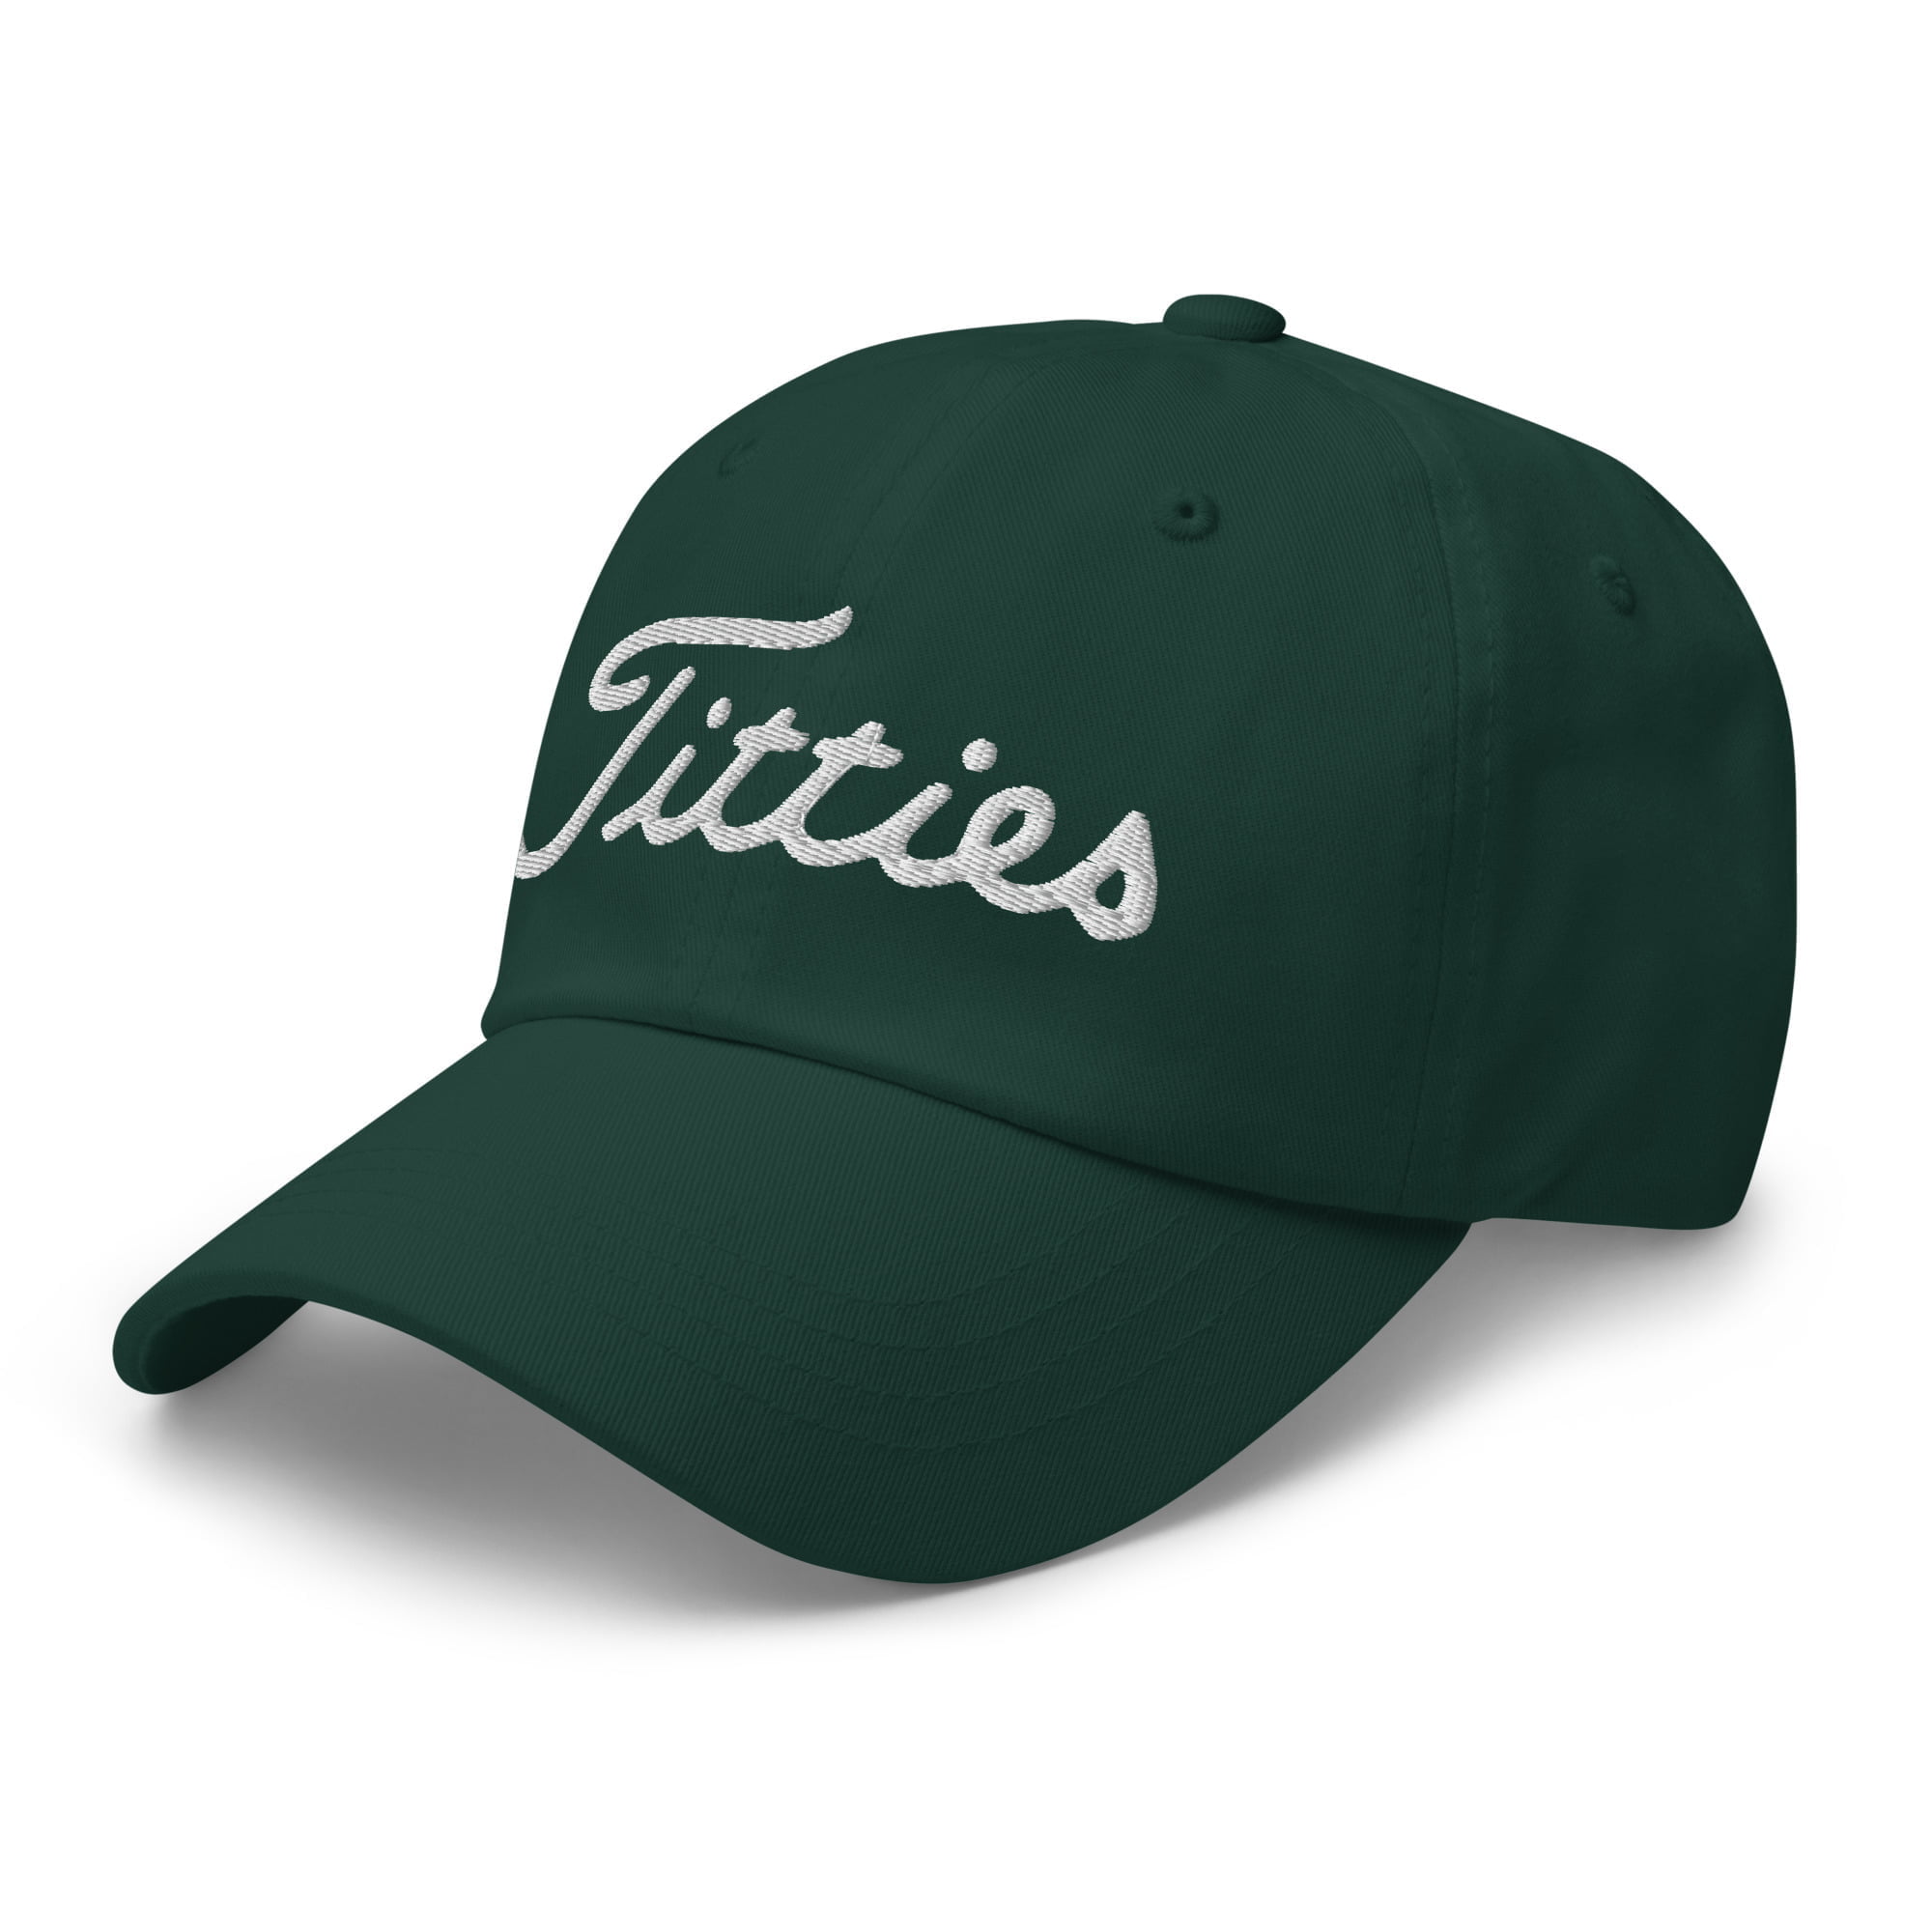 Titties Golf Classic Dad Hat - Golfing Enthusiasts